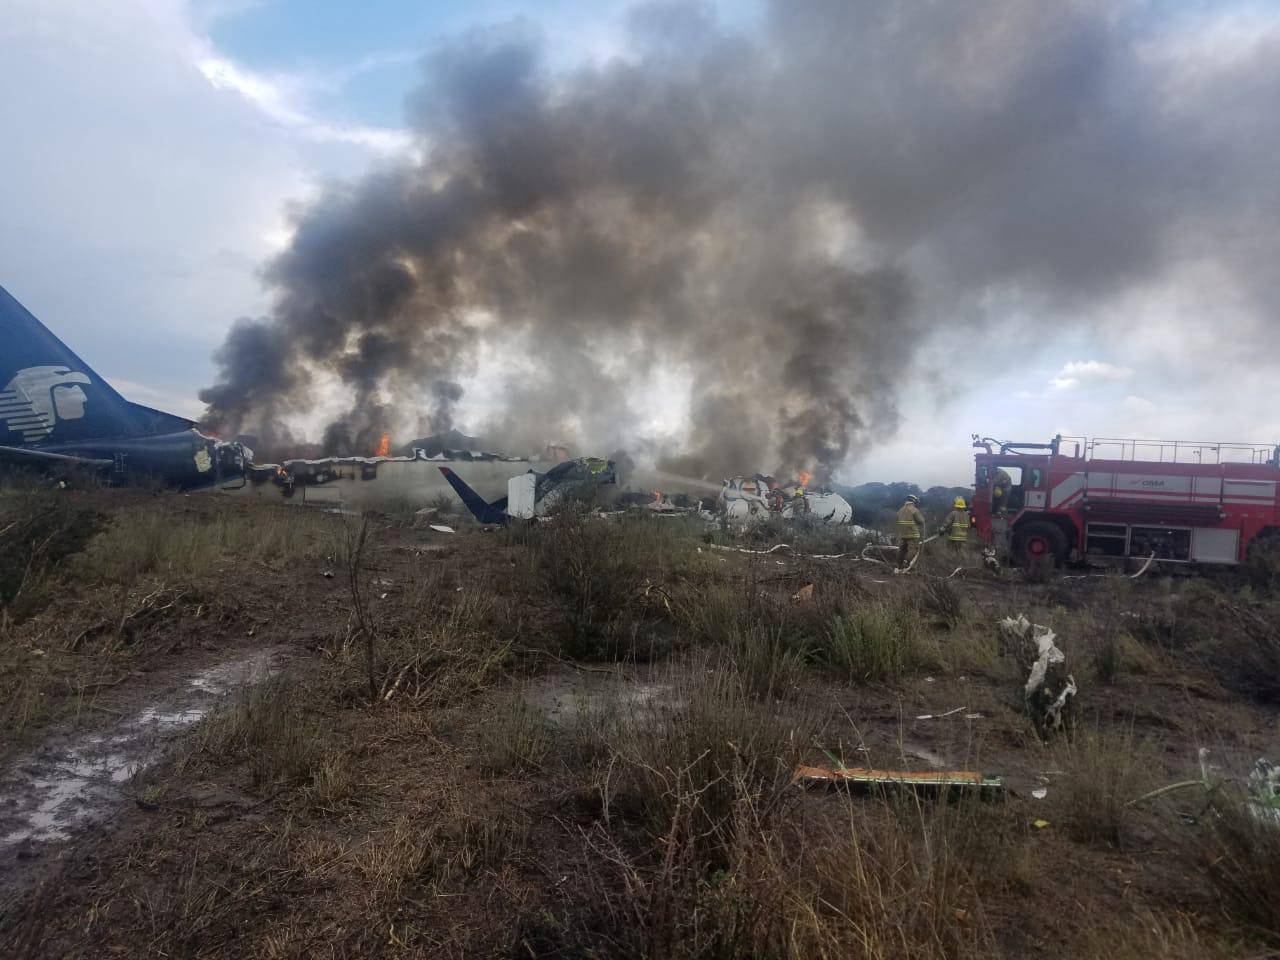 Firefighters douse a fire at the site where an Aeromexico-operated Embraer passenger jet crashed in Mexico's northern state of Durango